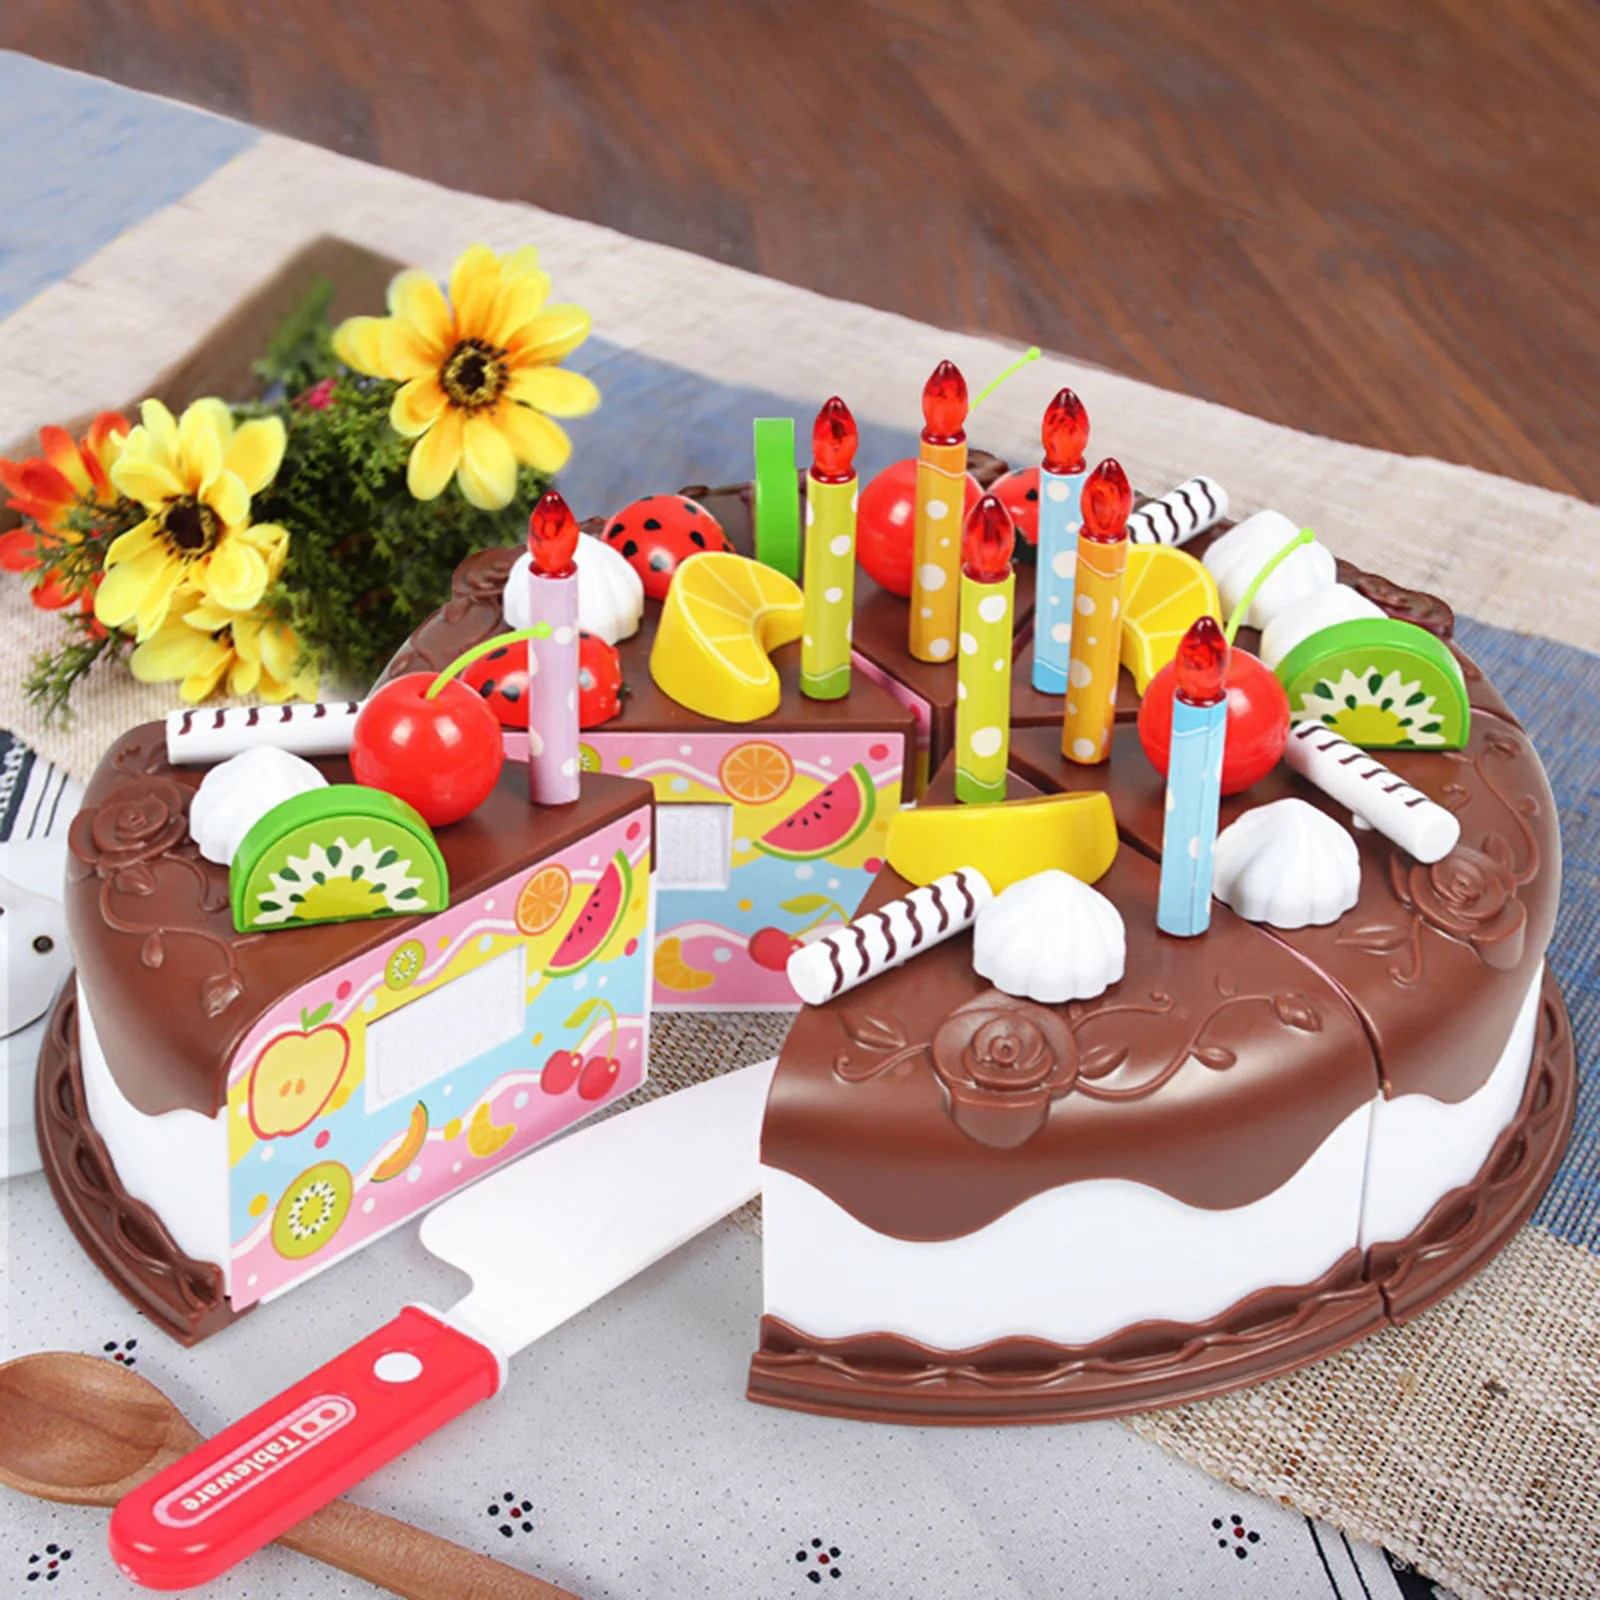 Kids Birthday Cake Toy for Baby & Toddlers with Counting Candles & Fruits, Gift Toys for 1 2 3 4 5 Years Old Boys and Girls